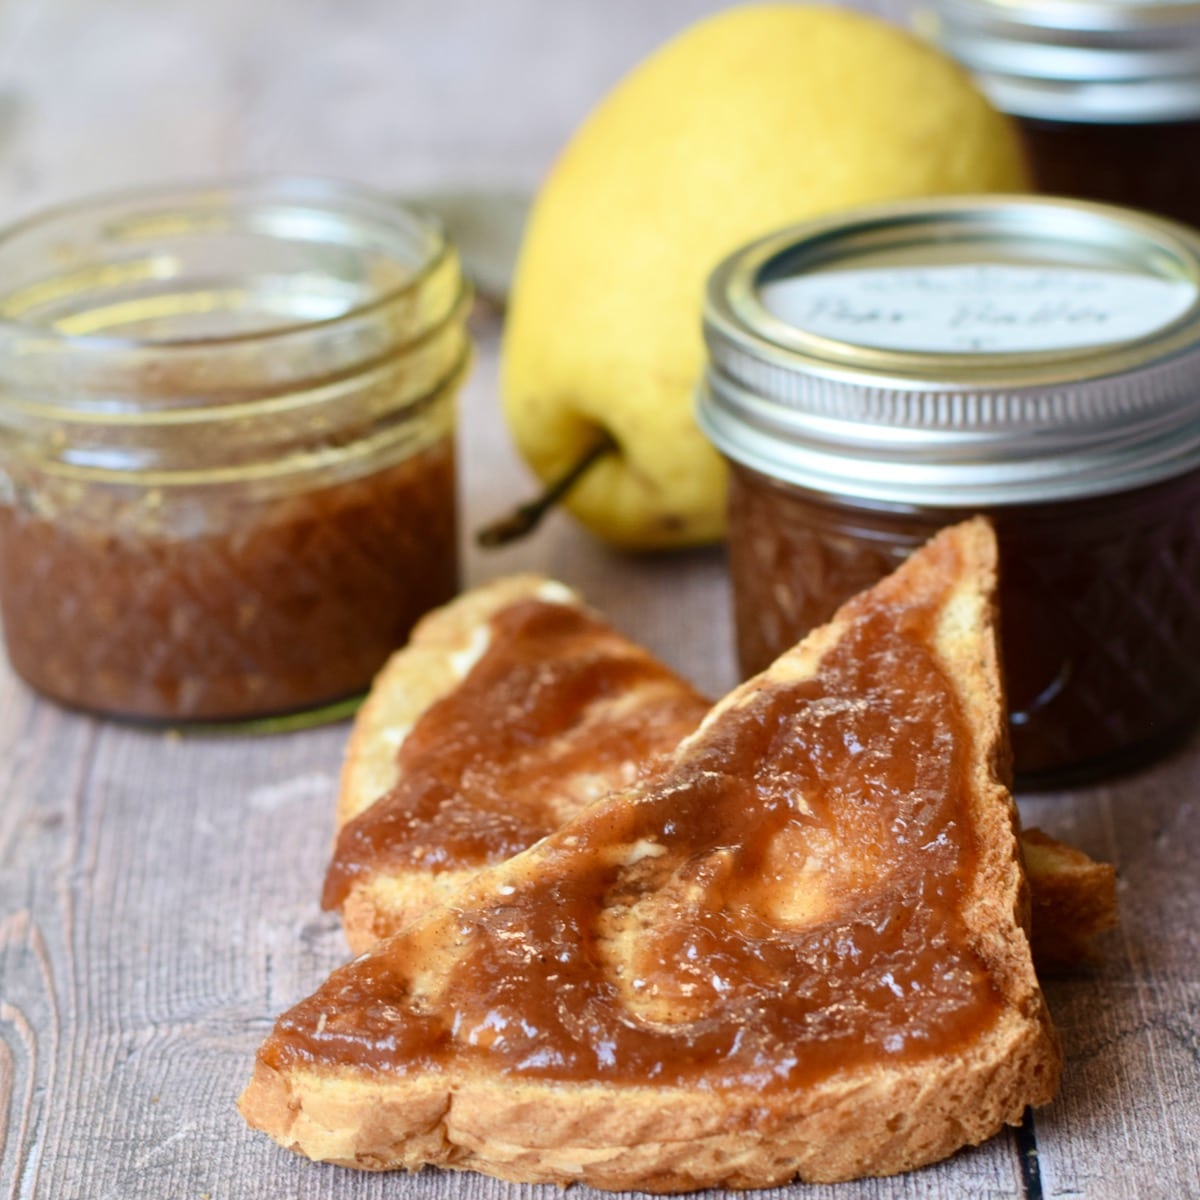 Square featured image of pear butter spread on triangular pieces of toast with two mason jars of pear butter in the background.